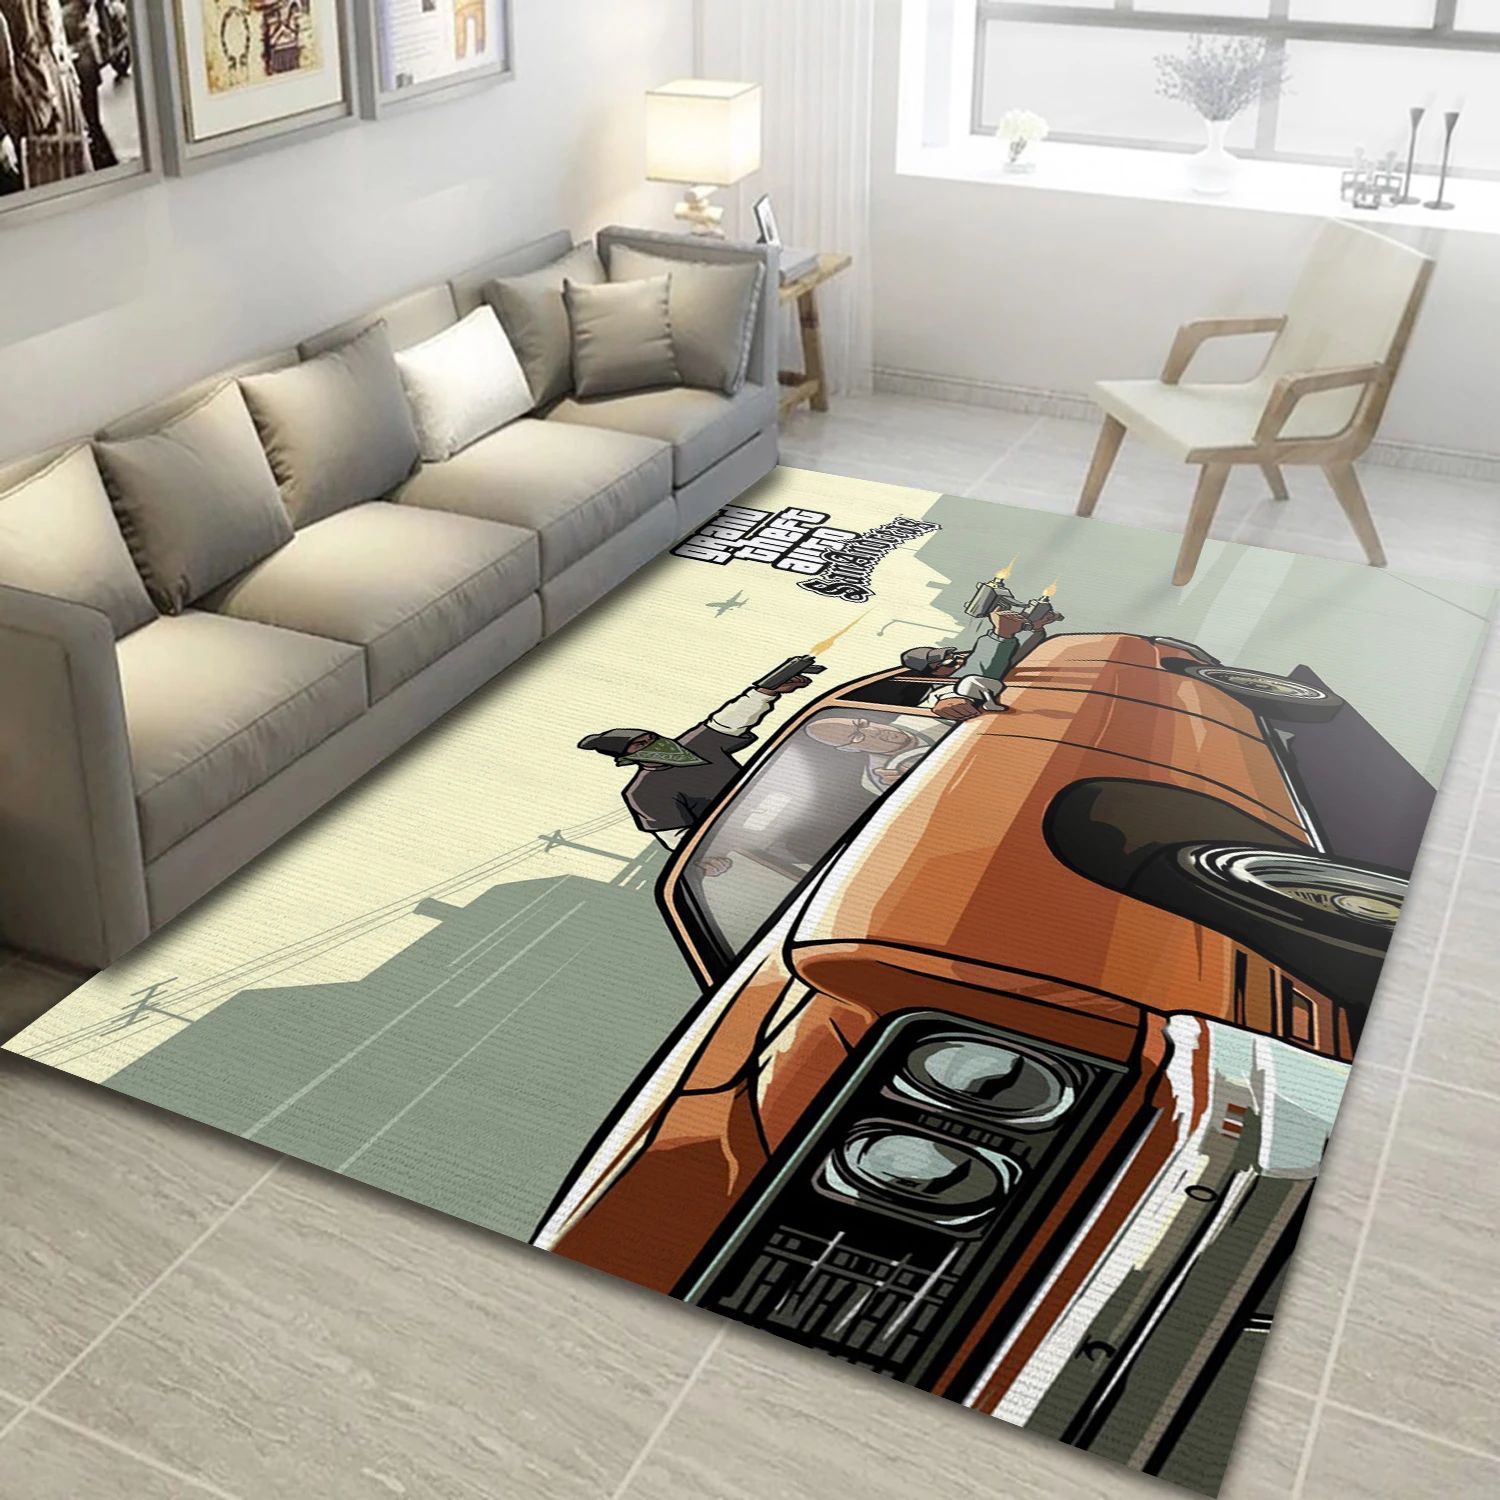 Grand Theft Auto San Andreas Video Game Area Rug Area, Area Rug - Christmas Gift Decor - Indoor Outdoor Rugs